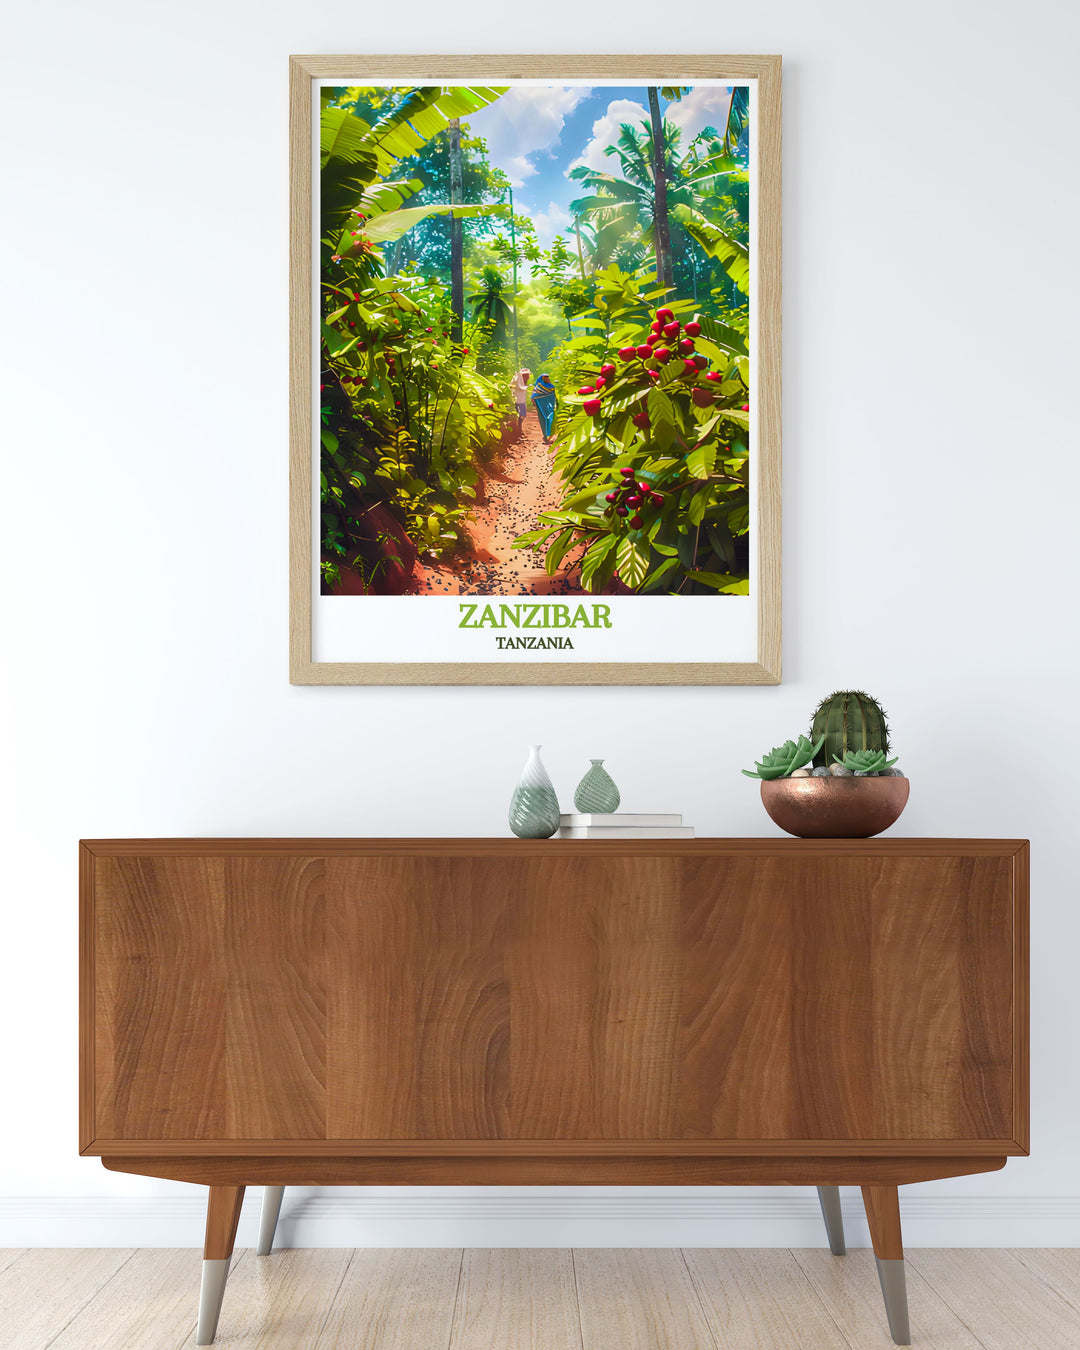 Unique Spice Farms vintage print illustrating the lush fields and vibrant colors of Zanzibars spice farms ideal for adding a touch of history and elegance to your home decor with timeless artwork that celebrates the beauty of nature.